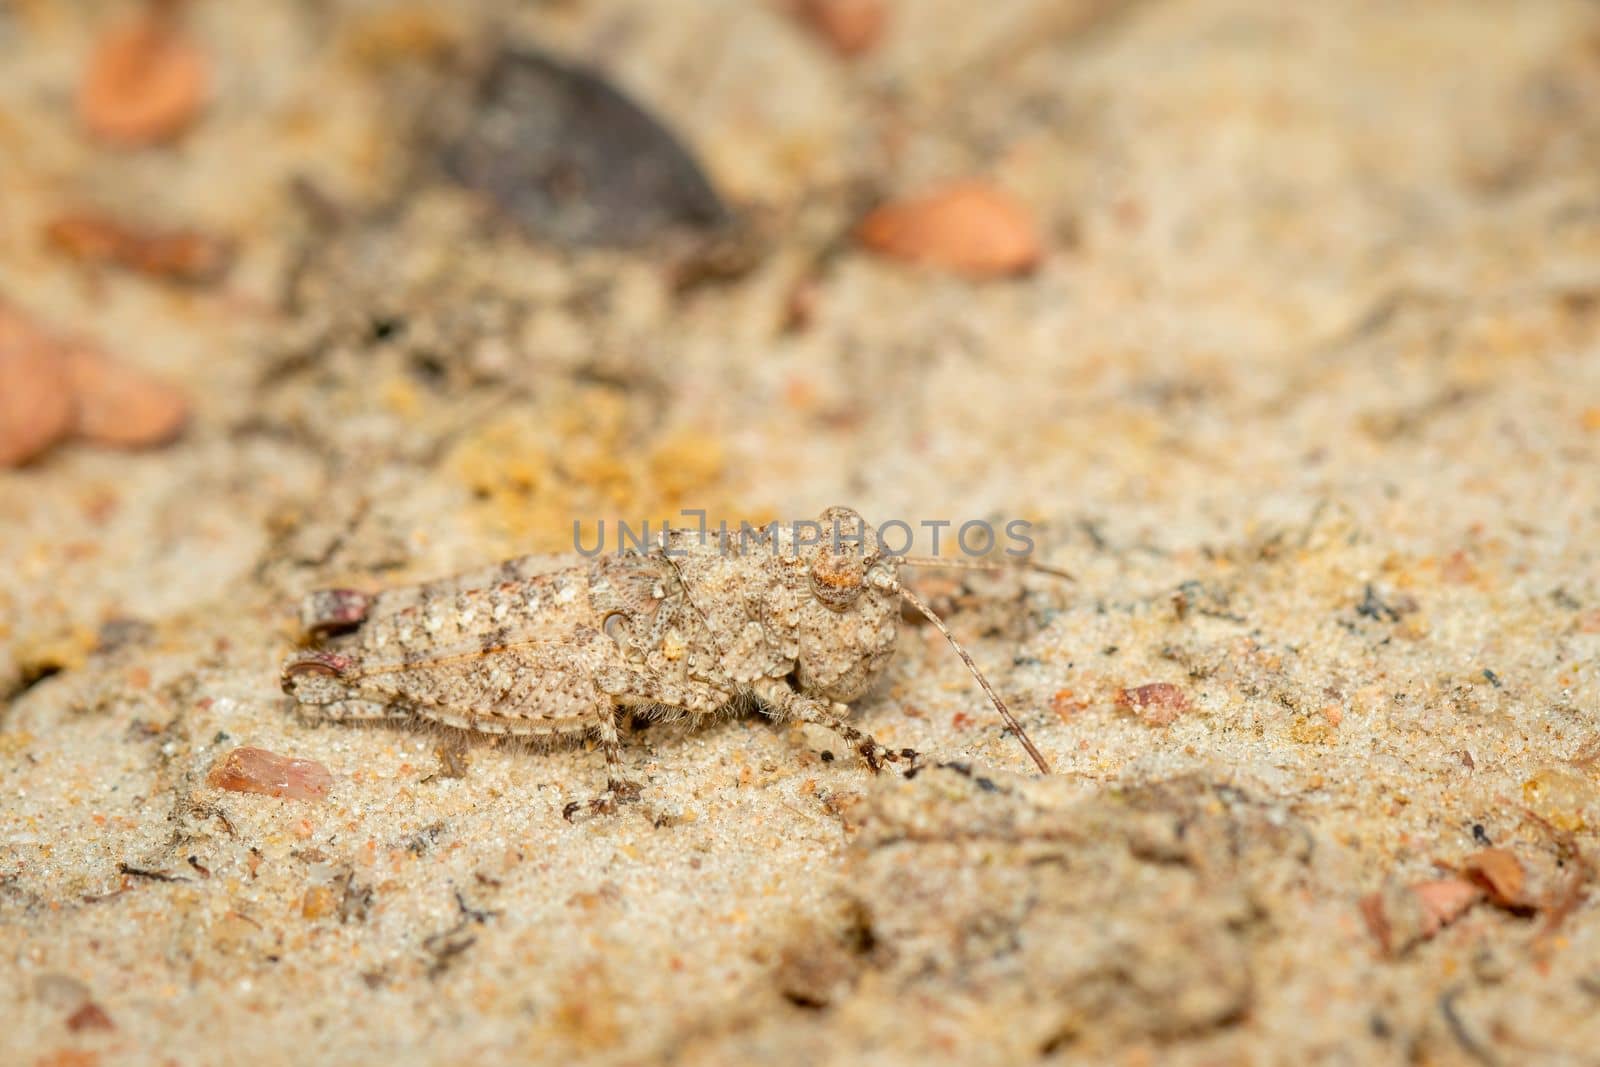 Image of a small brown cricket on the ground. Insect. Animal.  by yod67